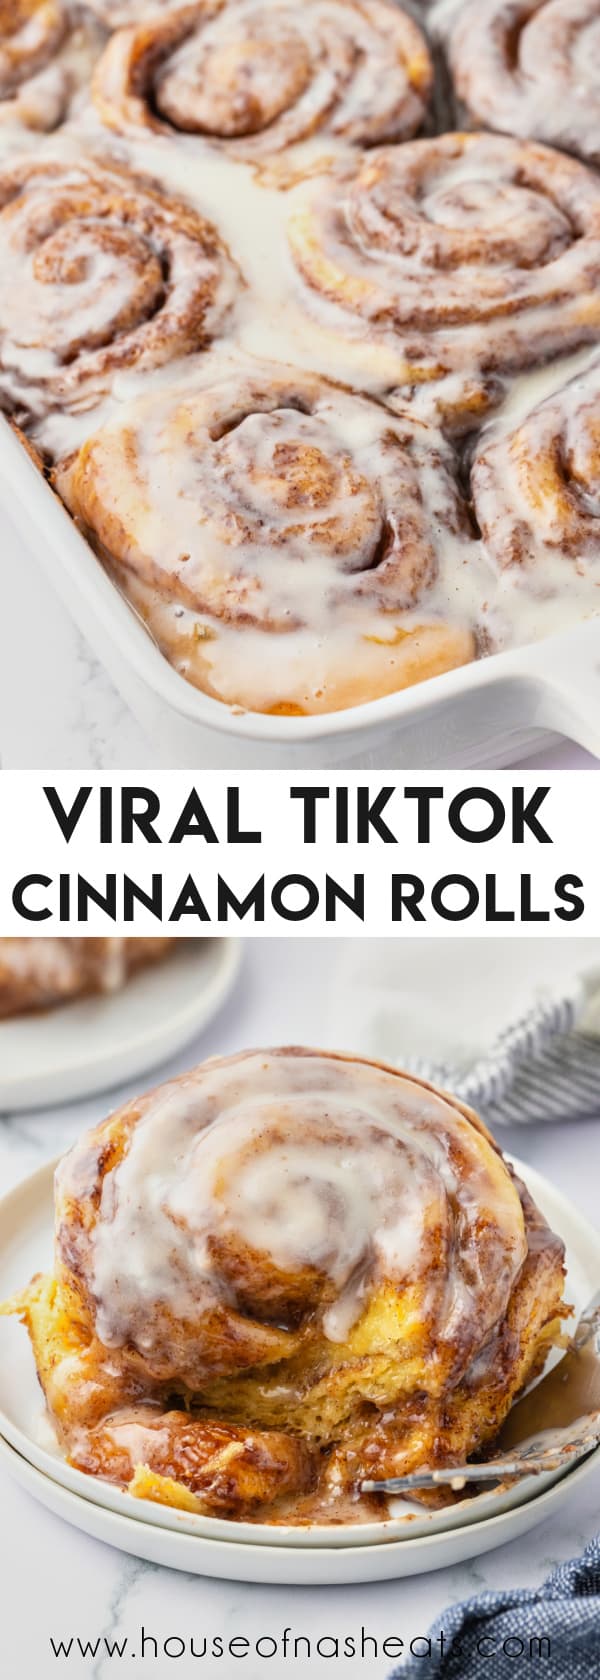 A collage of images of viral TikTok cinnamon rolls with text overlay.